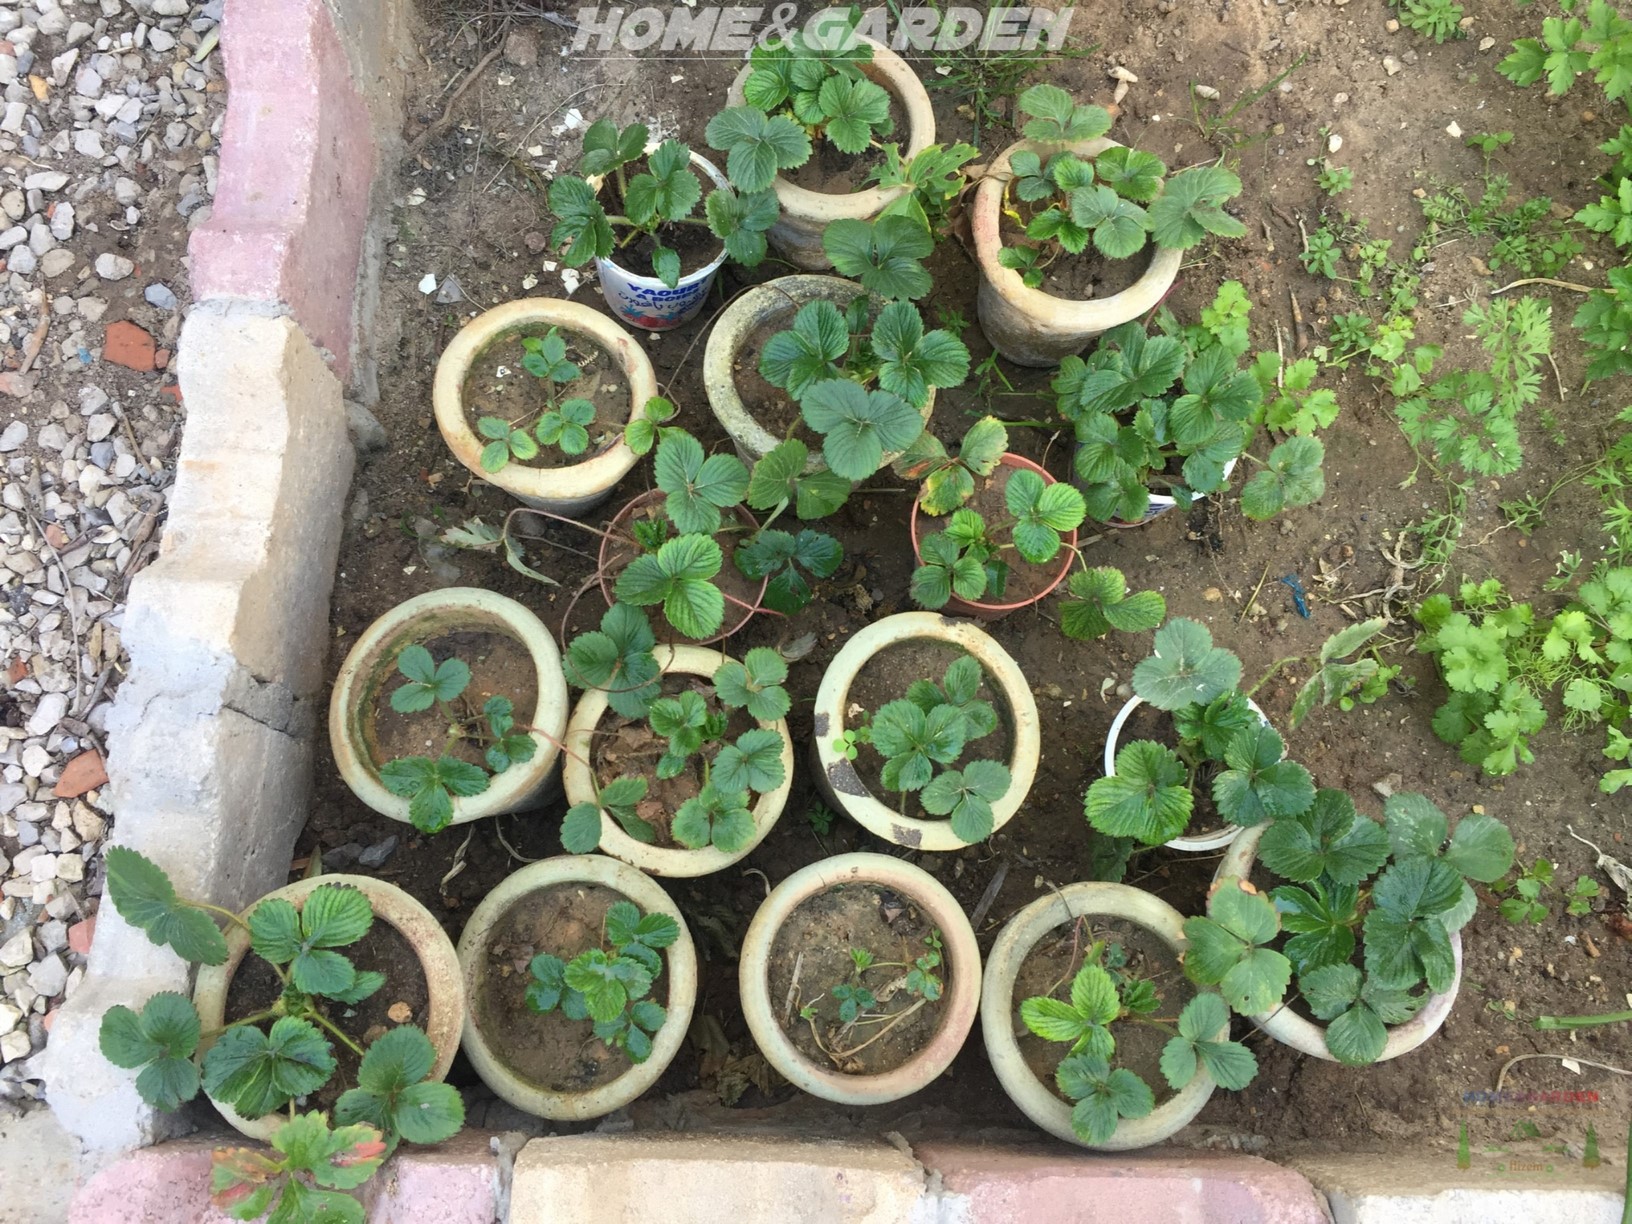 Strawberry propagation by runner is usually the easiest and most successful way of acquiring new plants from existing ones.